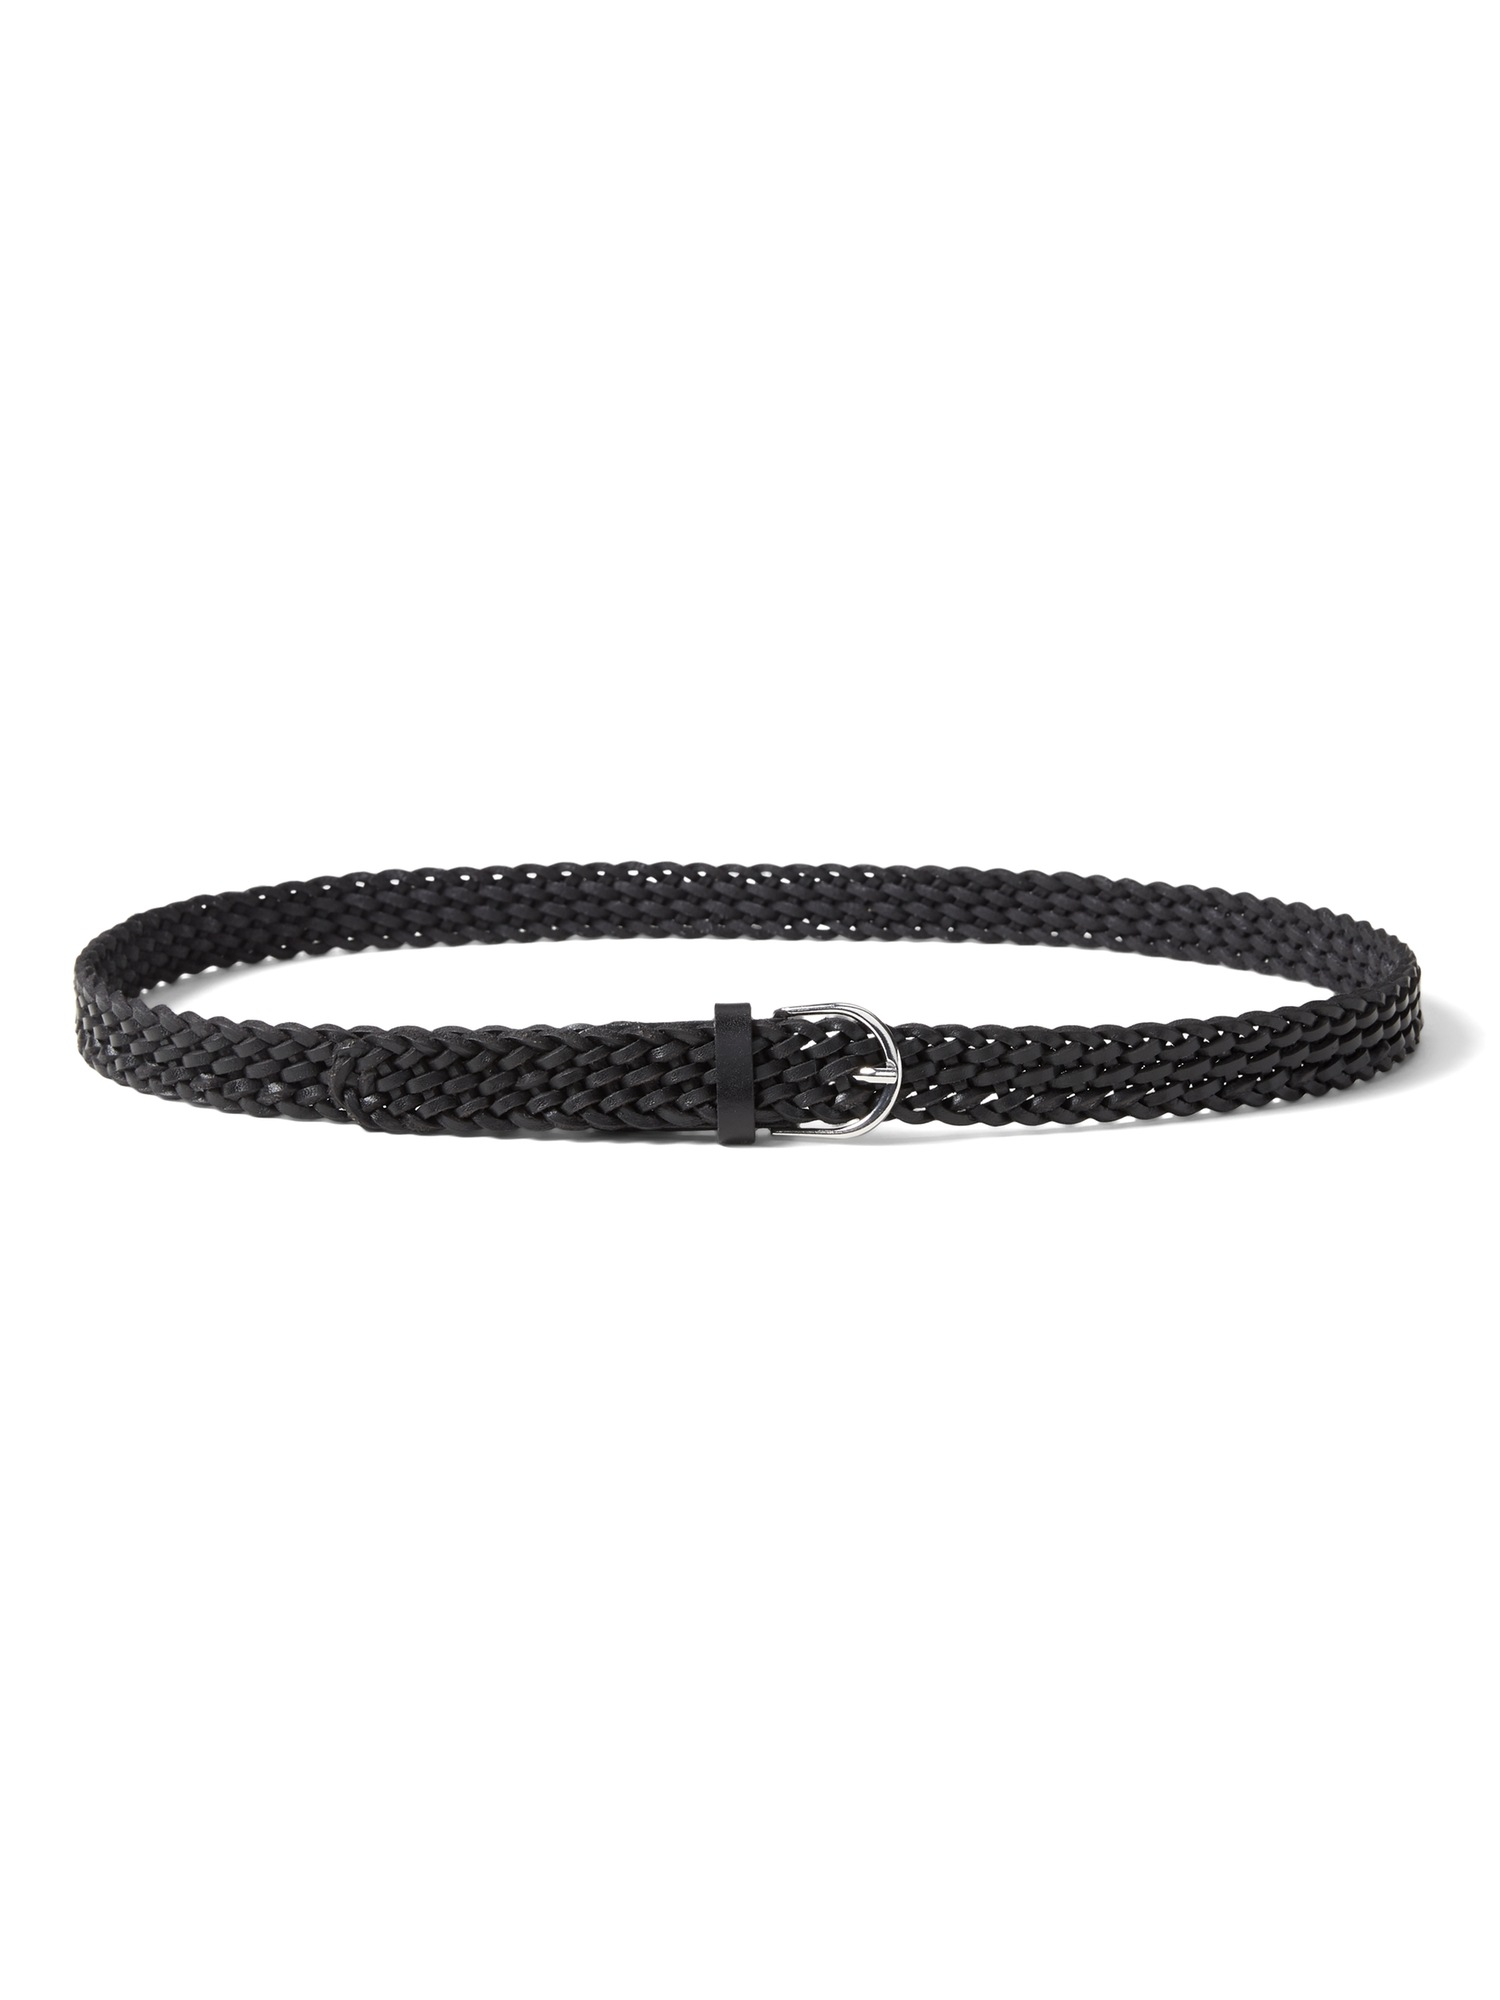 Braided Leather Small Trouser Belt